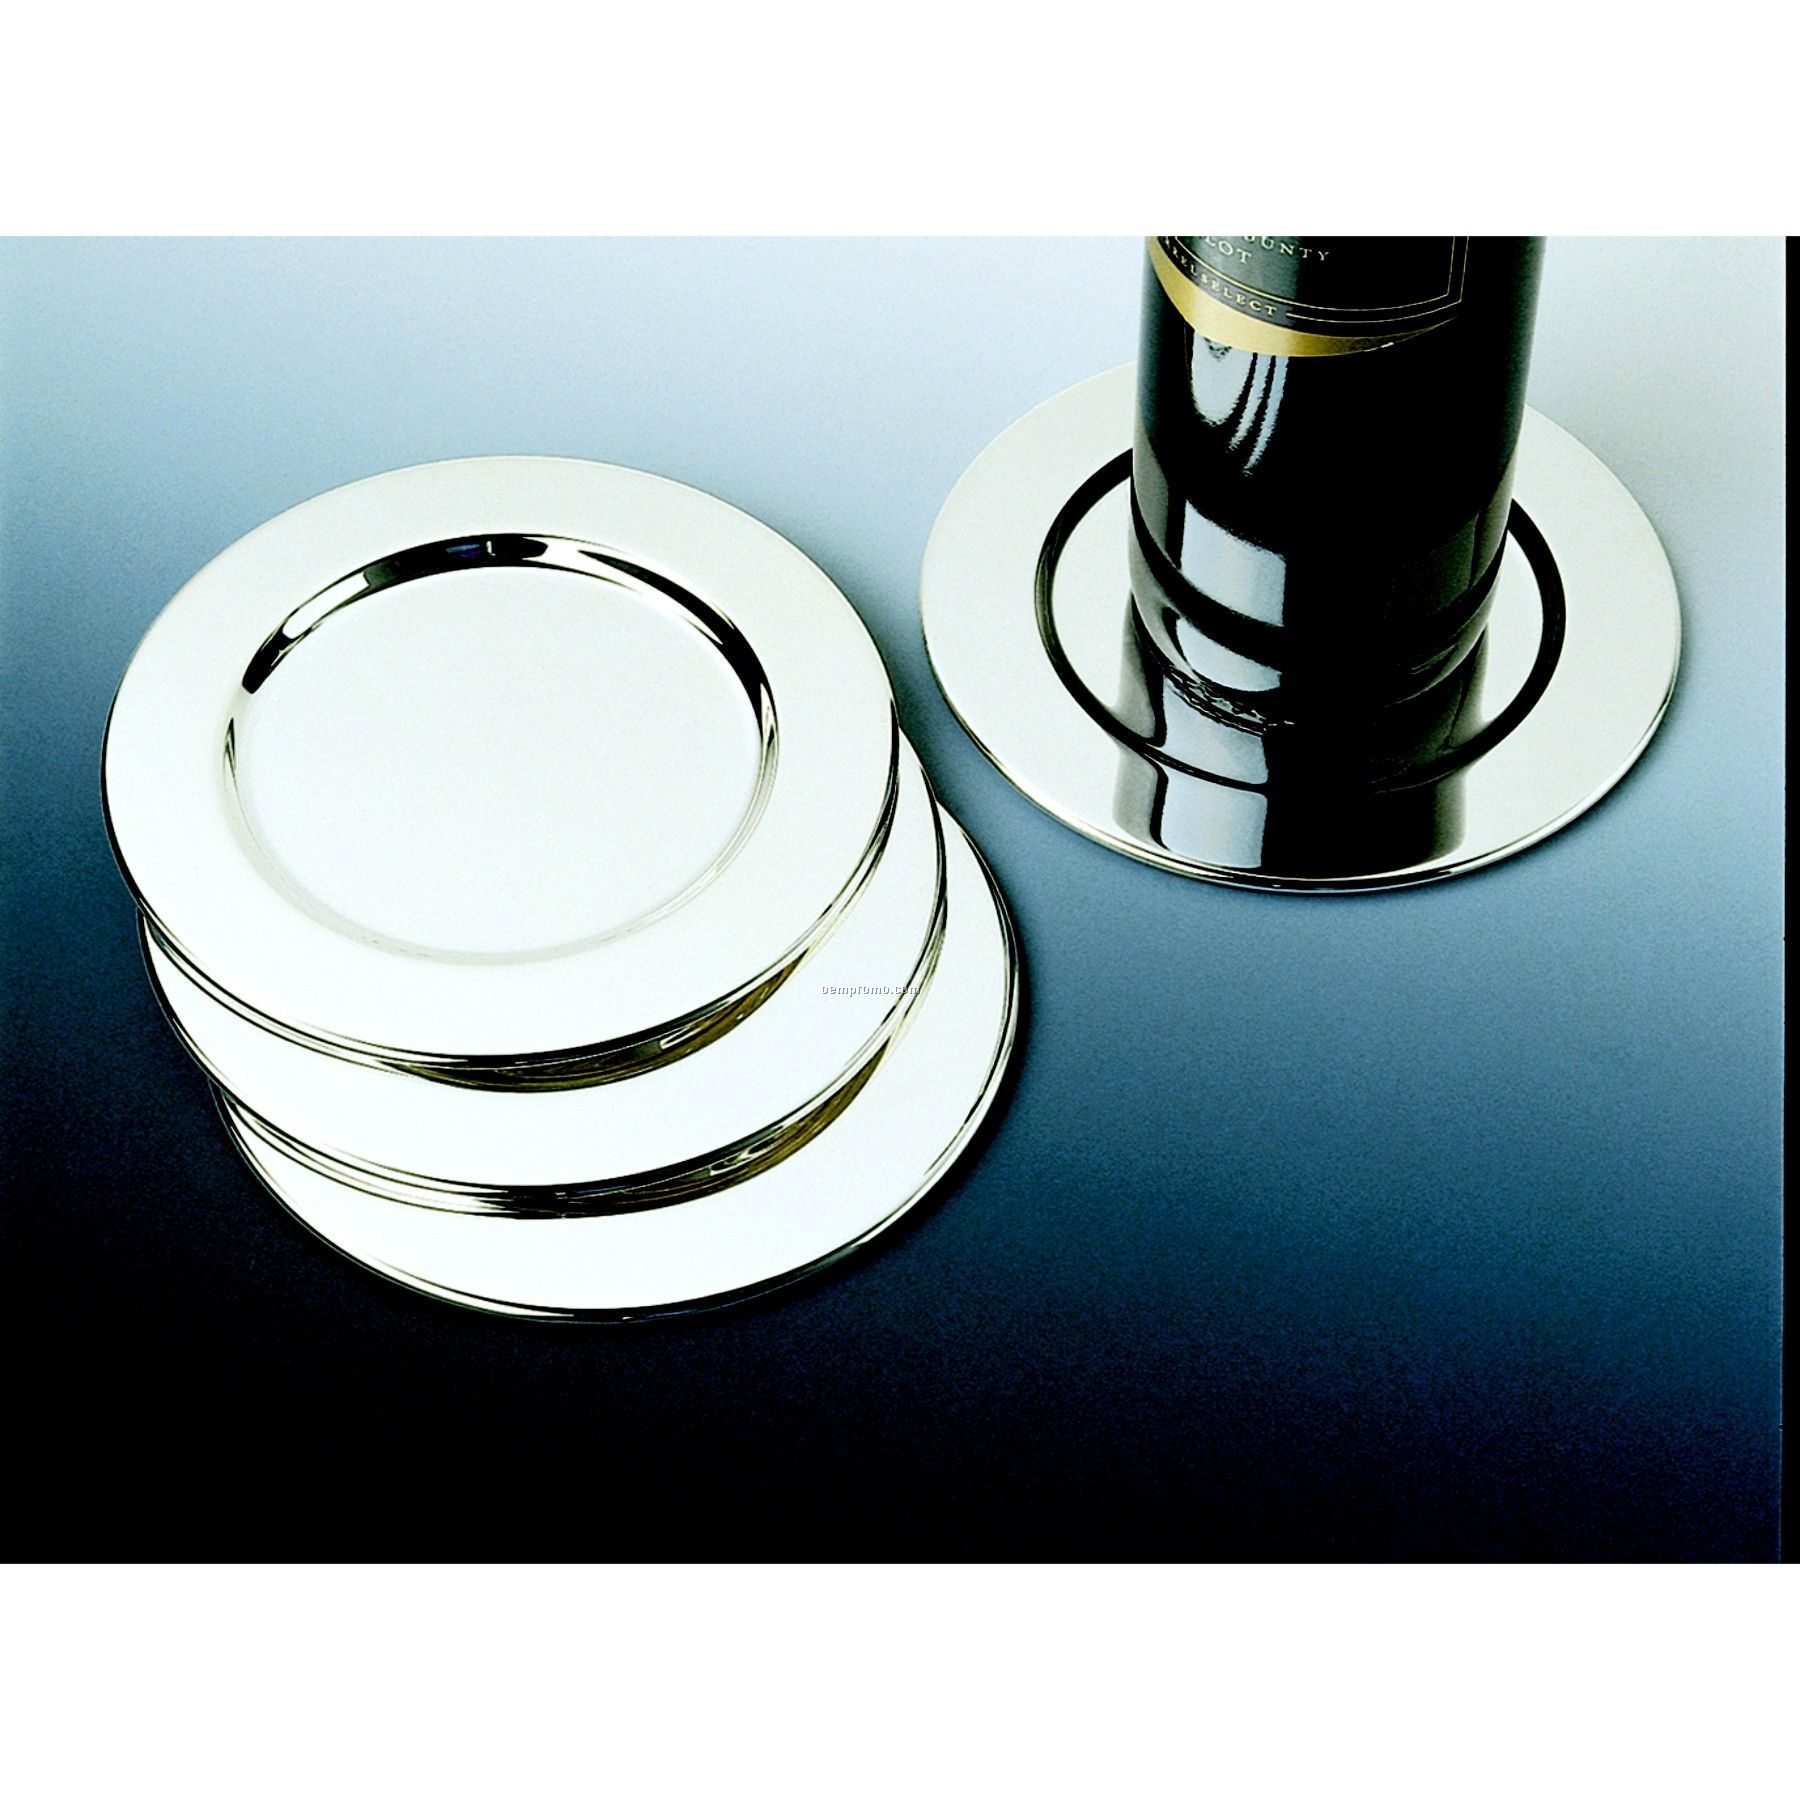 Silver Plated Plat Wine Bottle Coasters